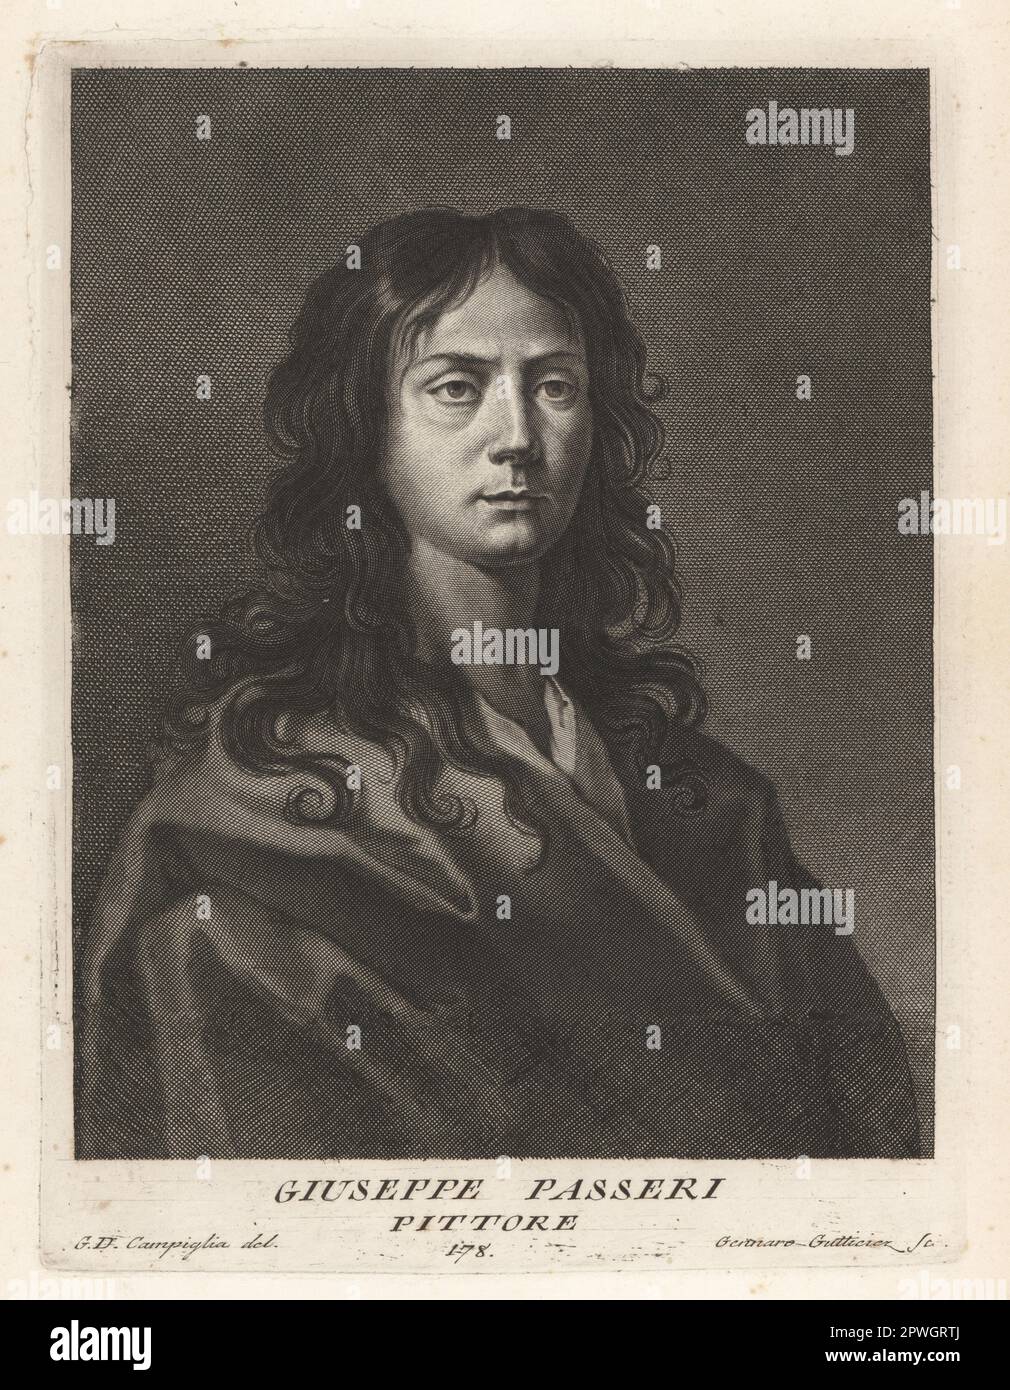 Giuseppe Passeri, Italian painter of the Baroque period, 1654-1714. Active in his native city of Rome. Nephew of the painter Giovanni Battista Passeri. Pittore. Copperplate engraving by Gennaro Guttiriez after Giovanni Domenico Campiglia after a self portrait by the artist from Francesco Moucke's Museo Florentino (Museum Florentinum), Serie di Ritratti de Pittori (Series of Portraits of Painters) stamperia Mouckiana, Florence, 1752-62. Copperplate engraving by Pietro Antonio Pazzi after Giovanni Domenico Campiglia after a self portrait by the artist from Francesco Moucke's Museo Florentino (Mu Stock Photo